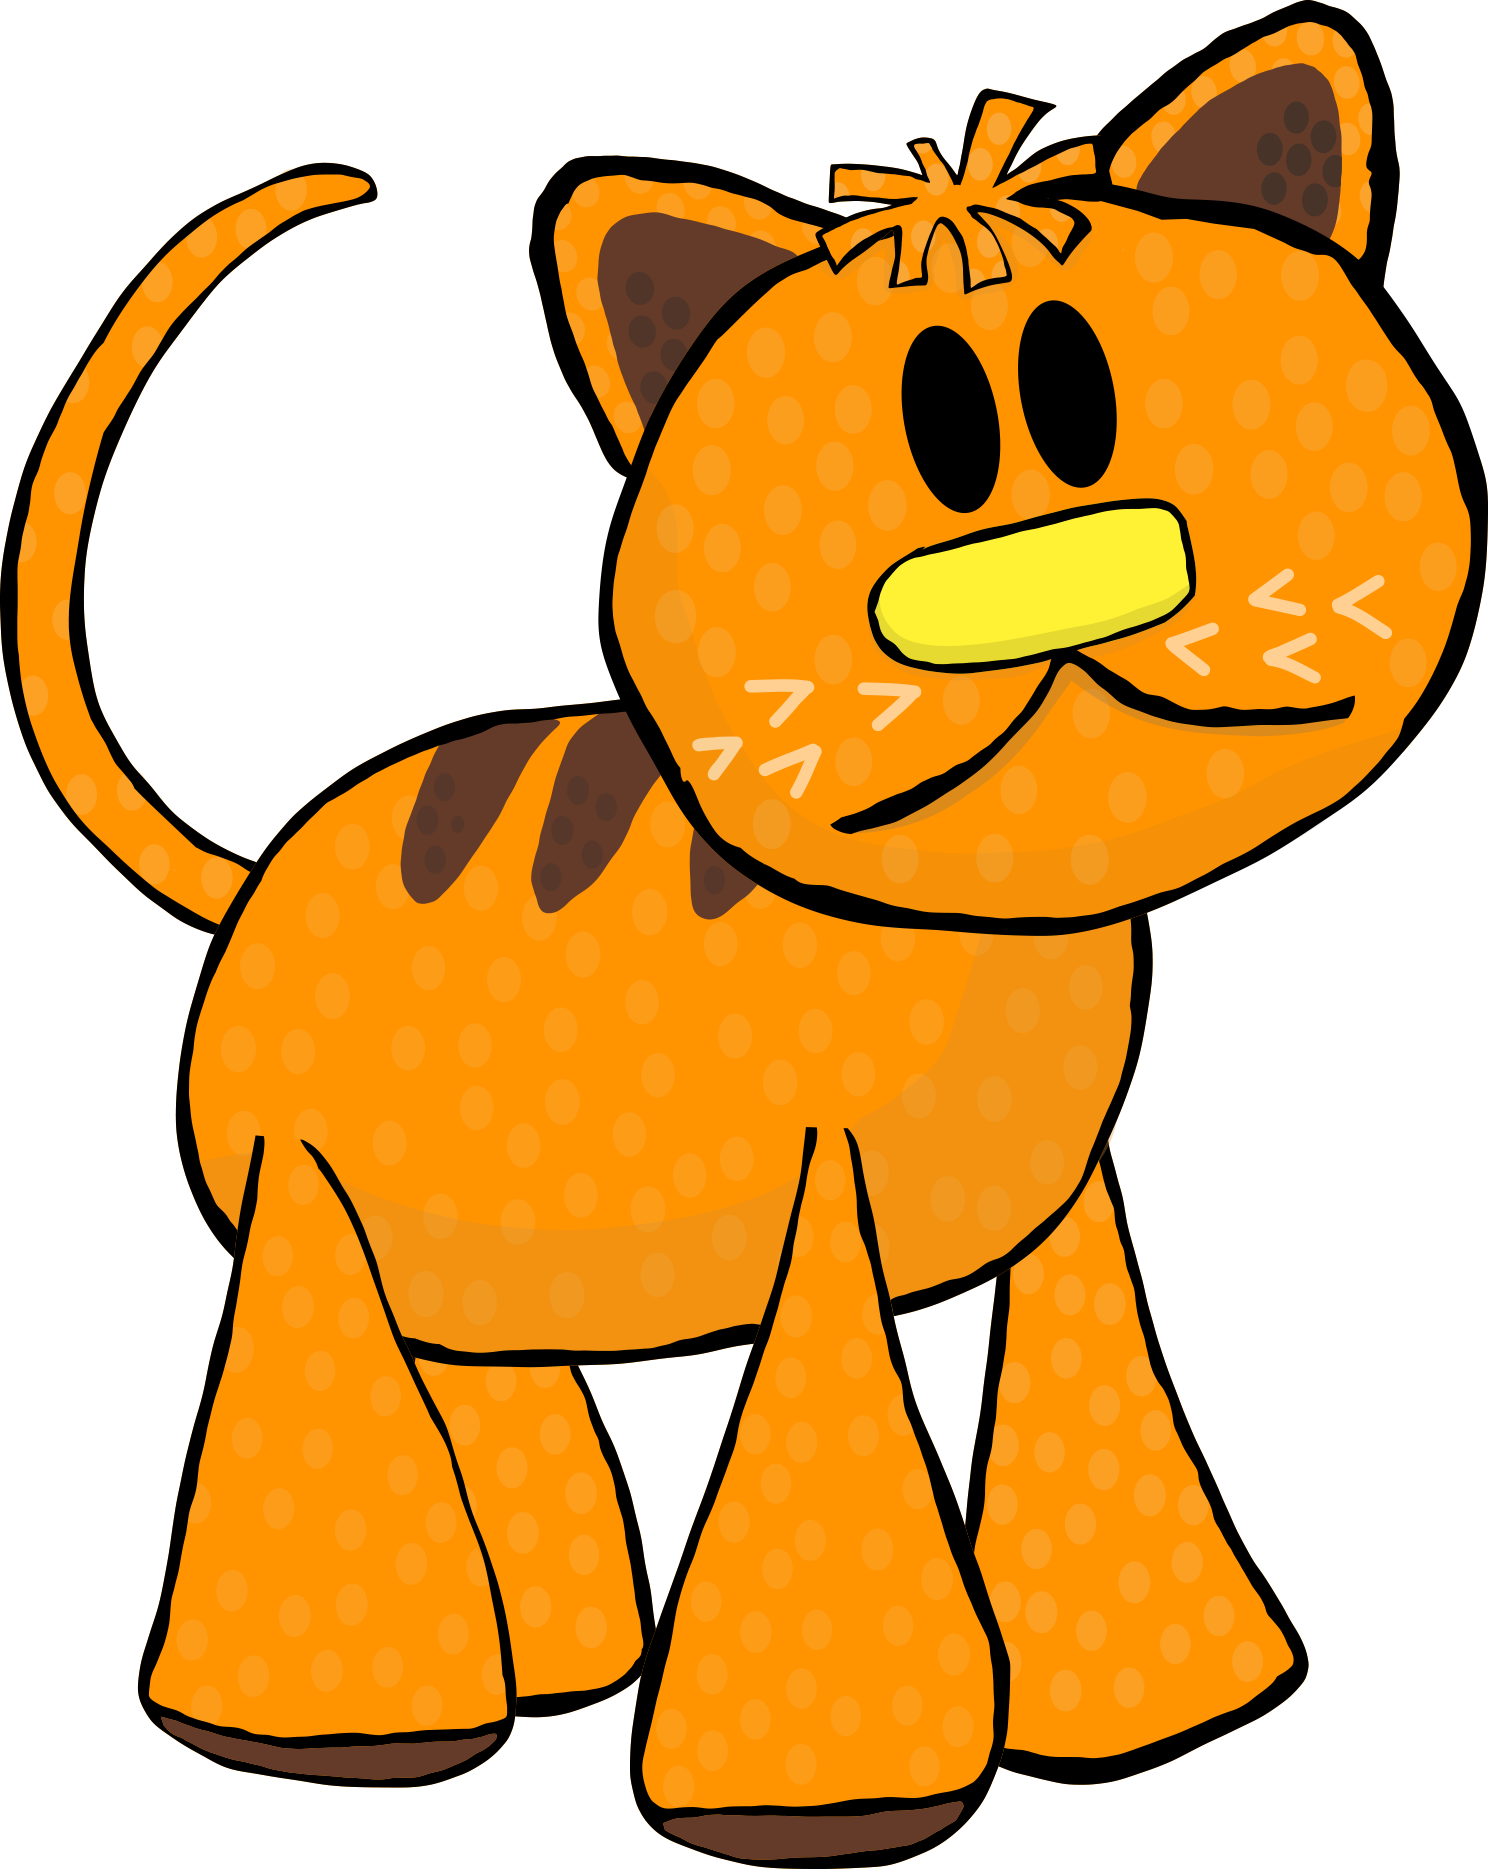 An illustration of the orange cat puppet. It has dark brown stripes on its back that match the inside of its ears. It has a yellow nose and little whiskers.